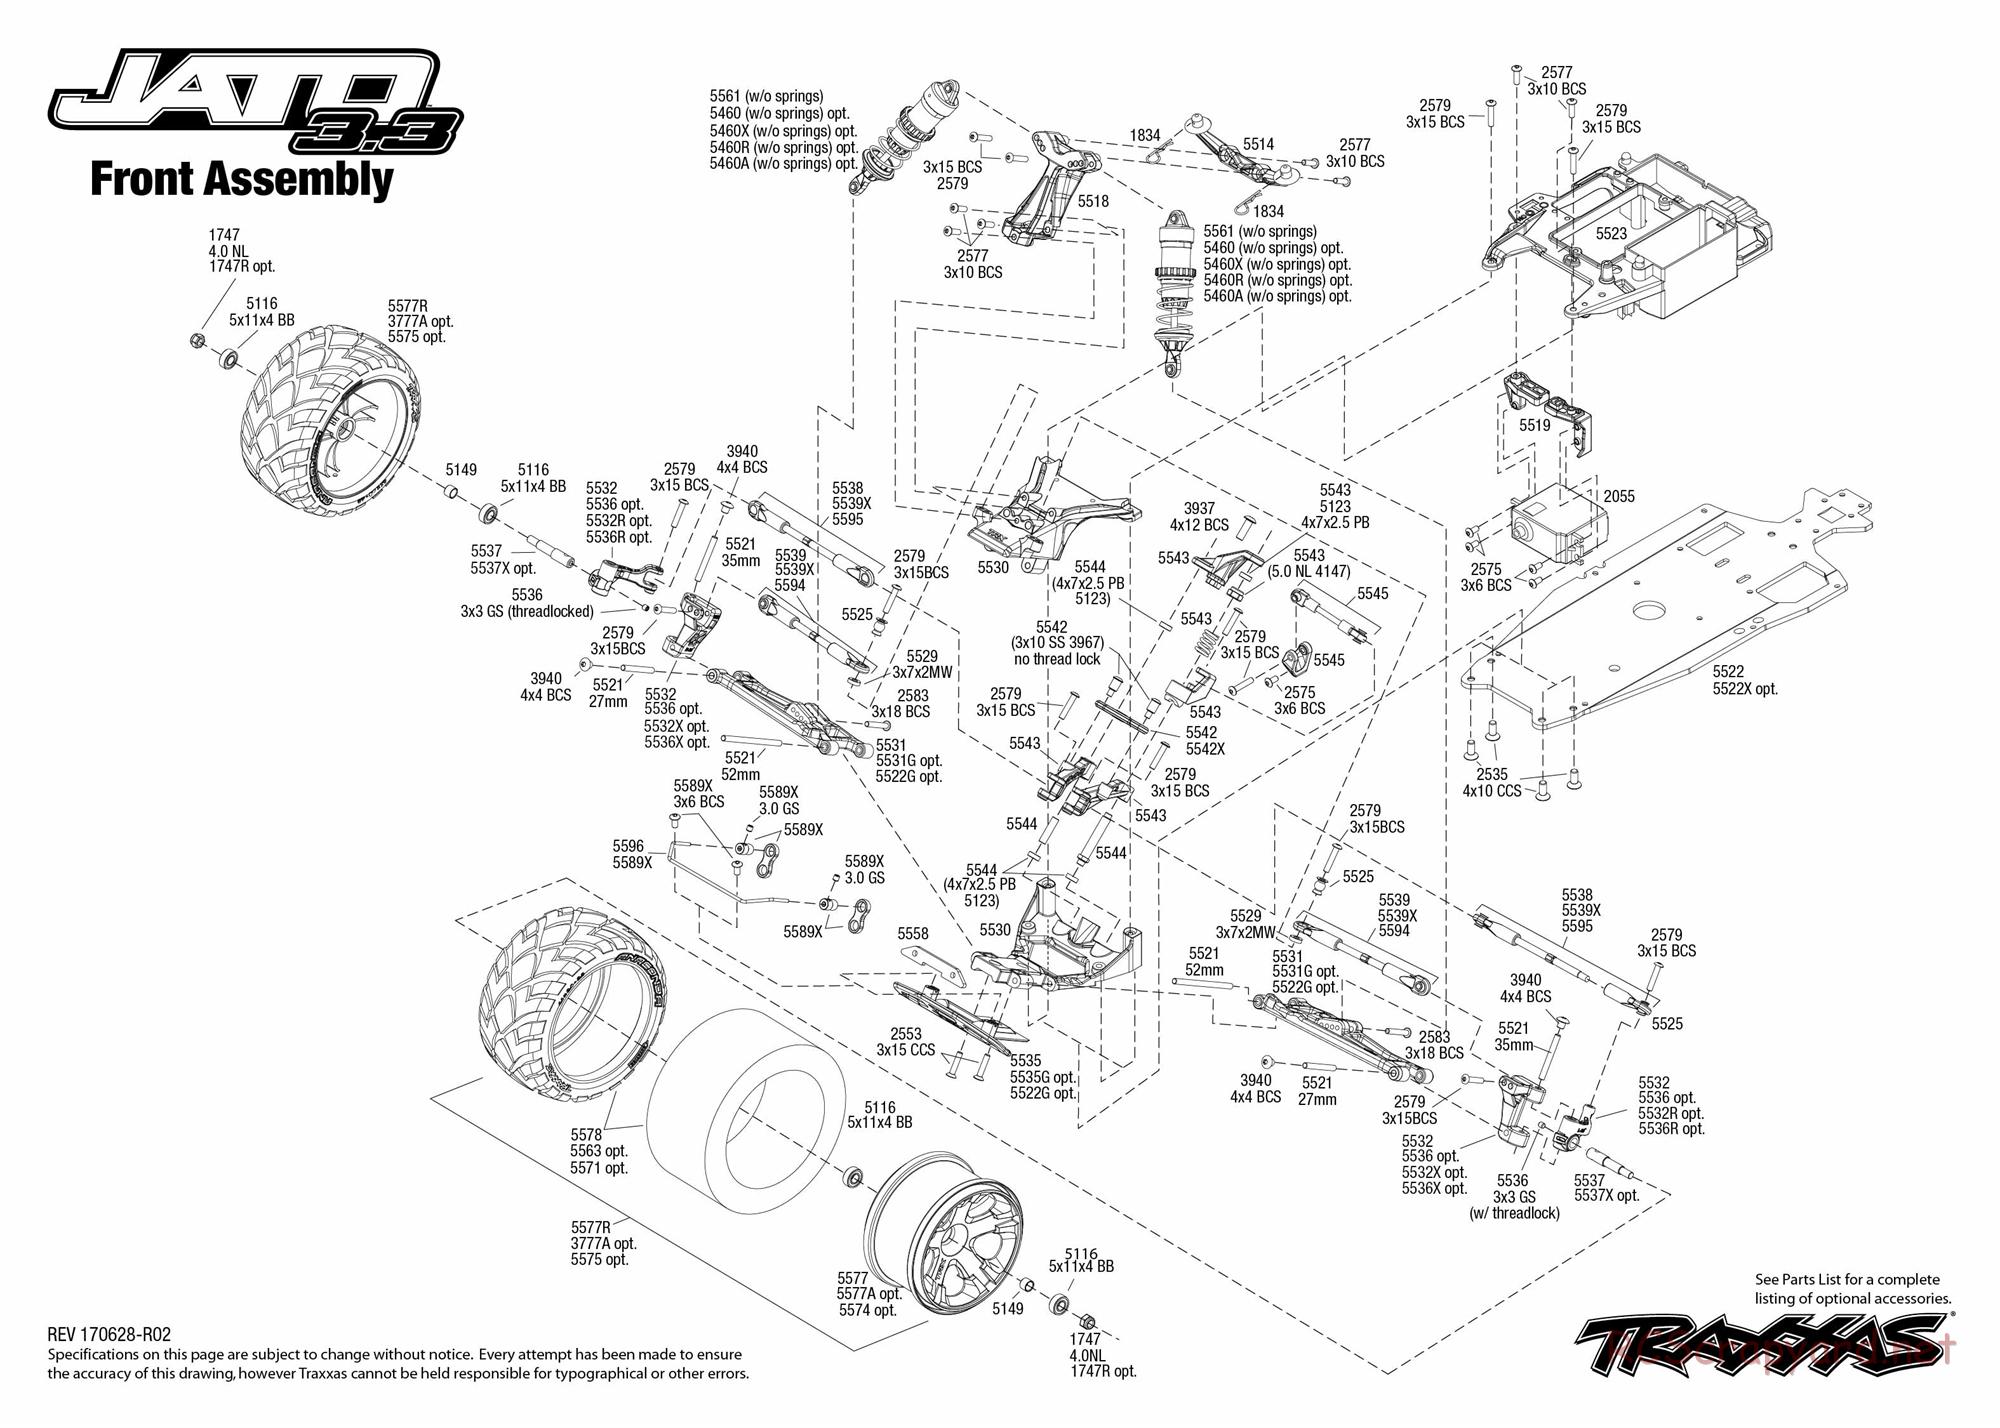 Traxxas - Jato 3.3 (2015) - Exploded Views - Page 3